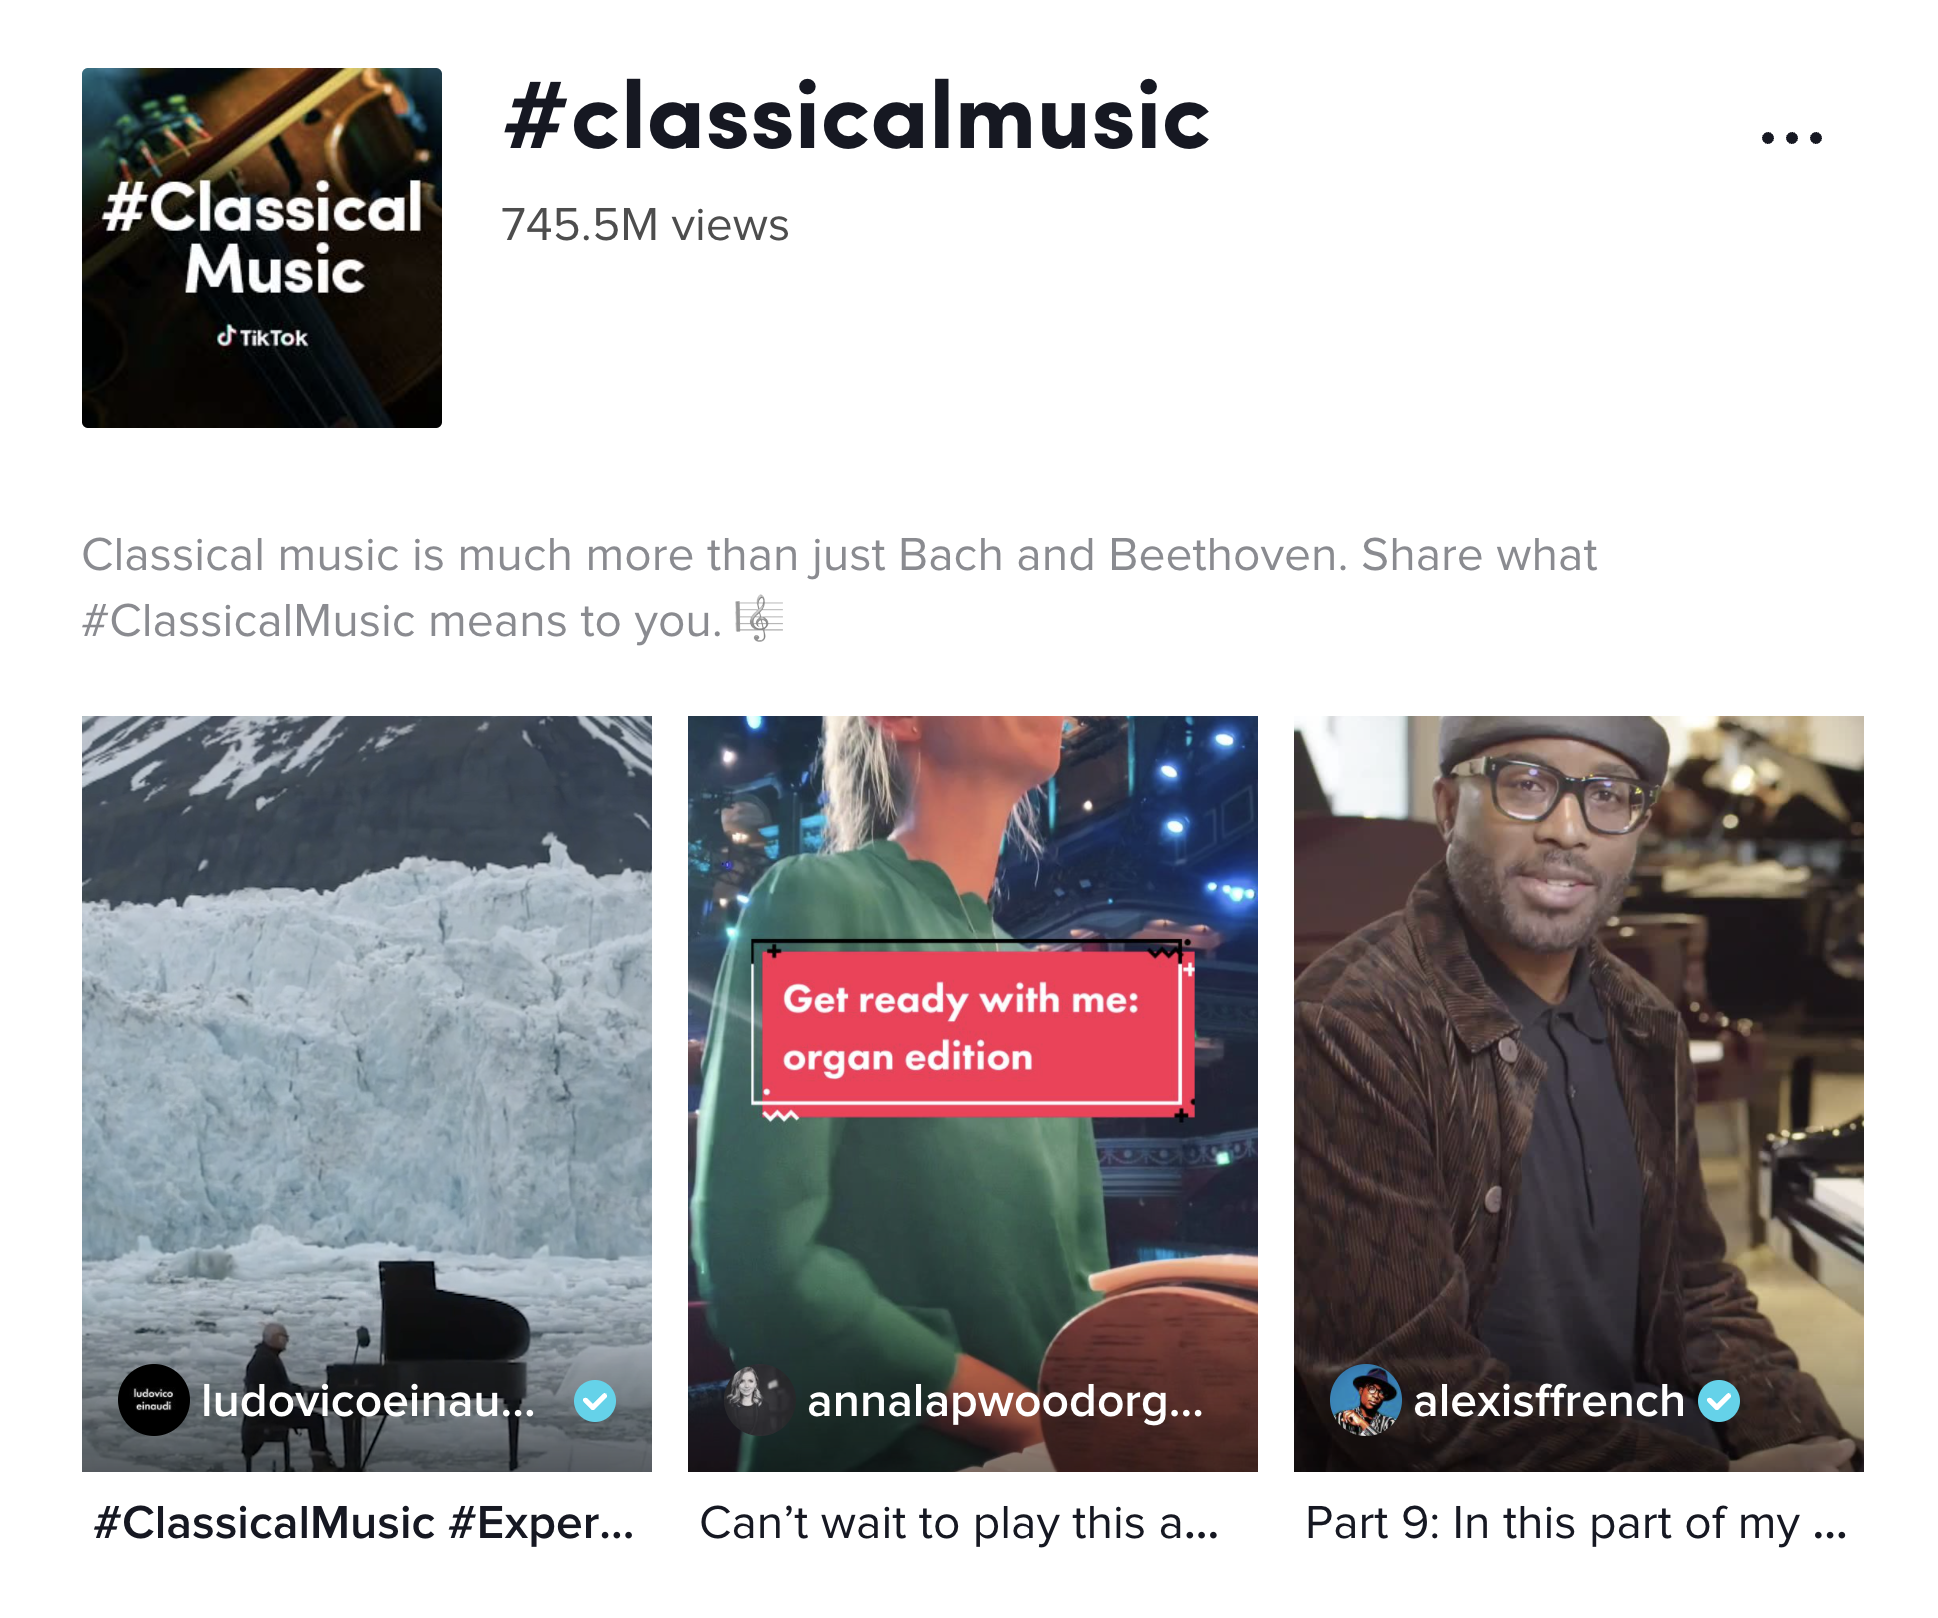 #ClassicalMusic is trending on TikTok with over 745 million views